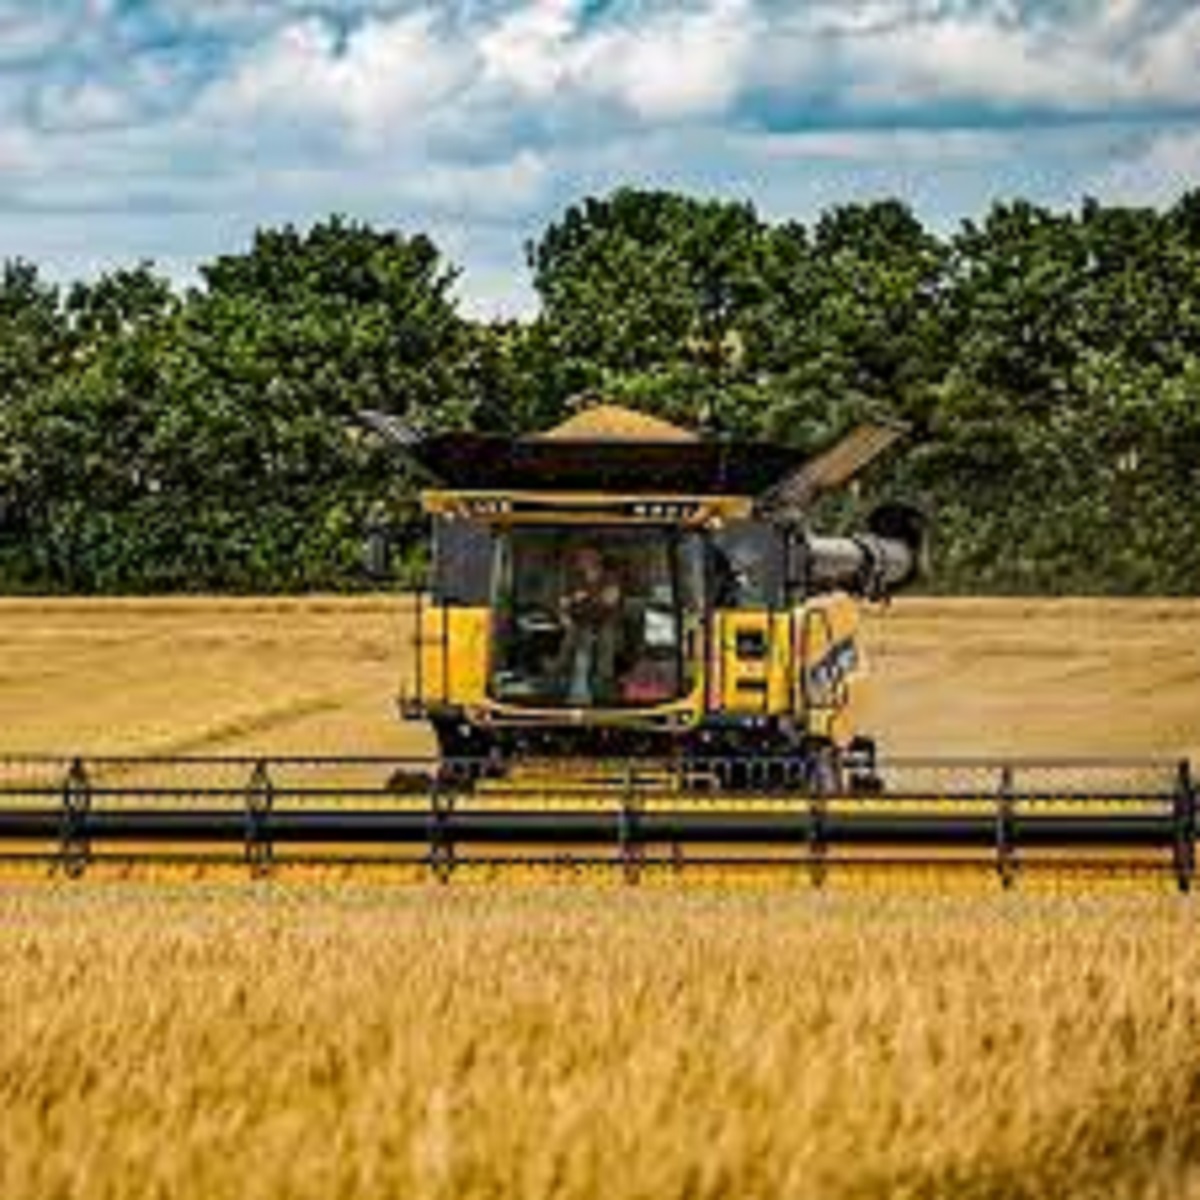 Major Investments Announced for UK Farming and Food Sector